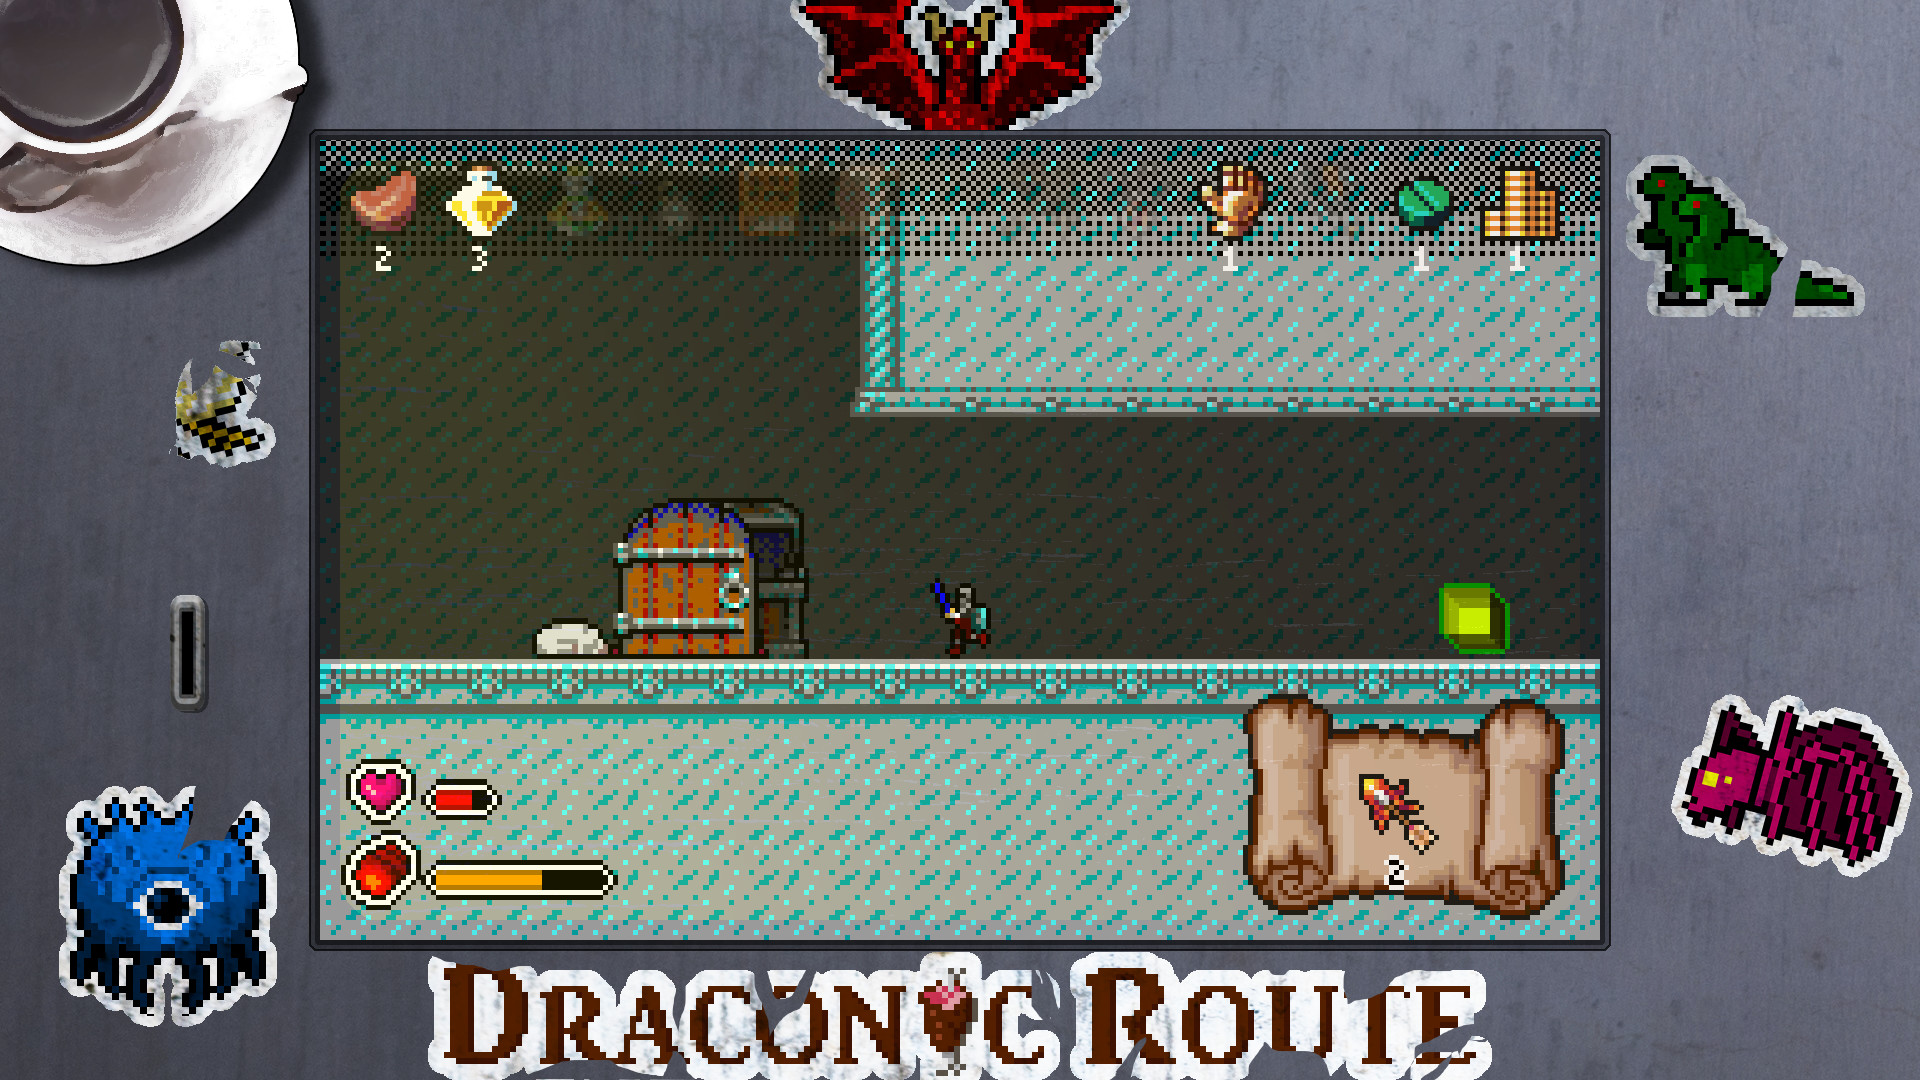 Draconic Route Free Download